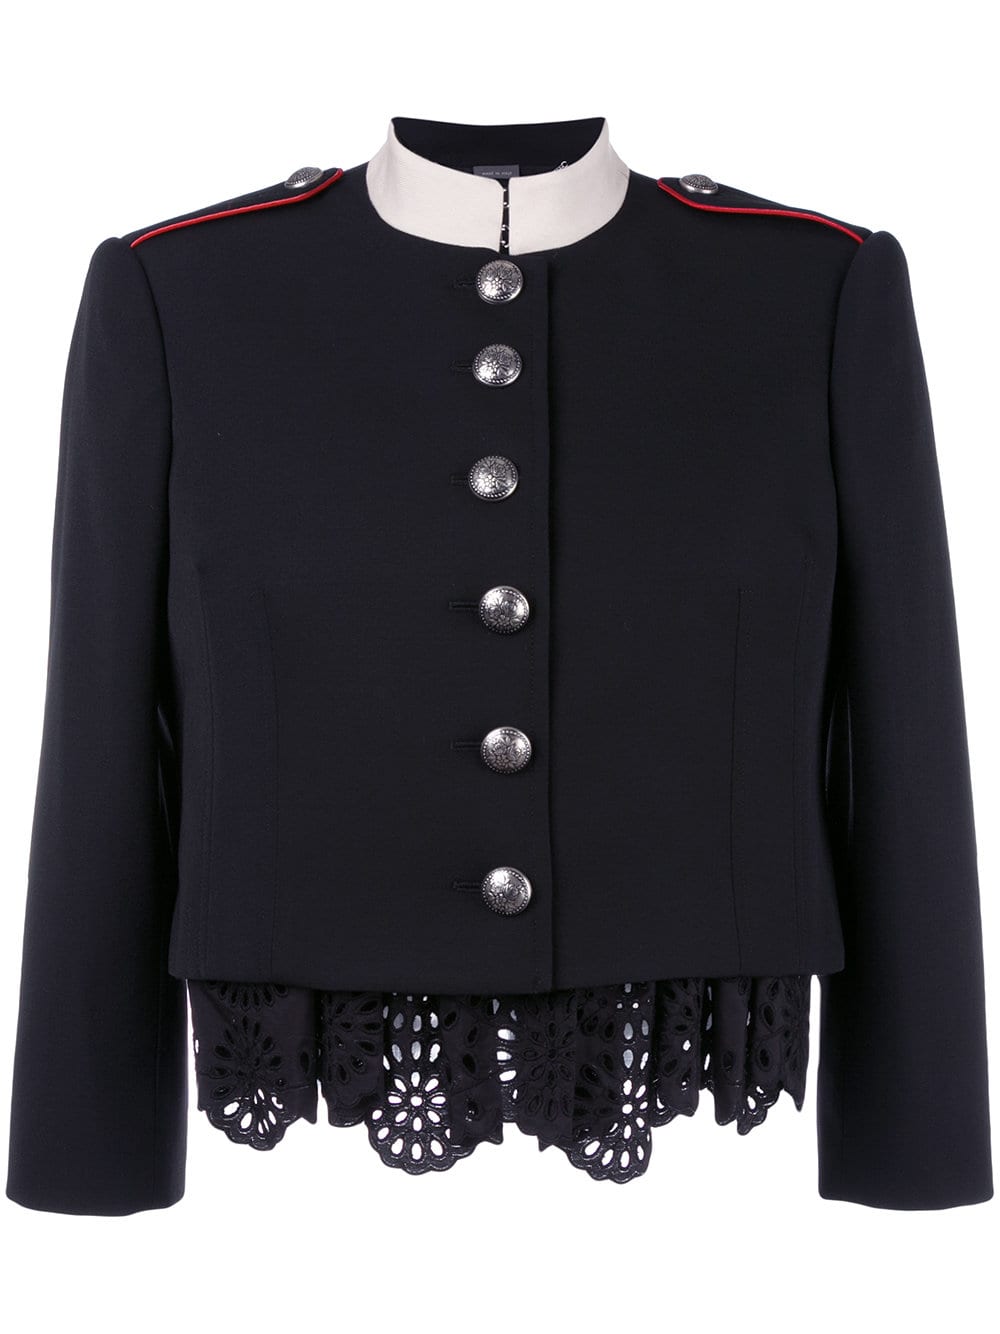 Alexander McQueen Military Jacket with Lace Inserts